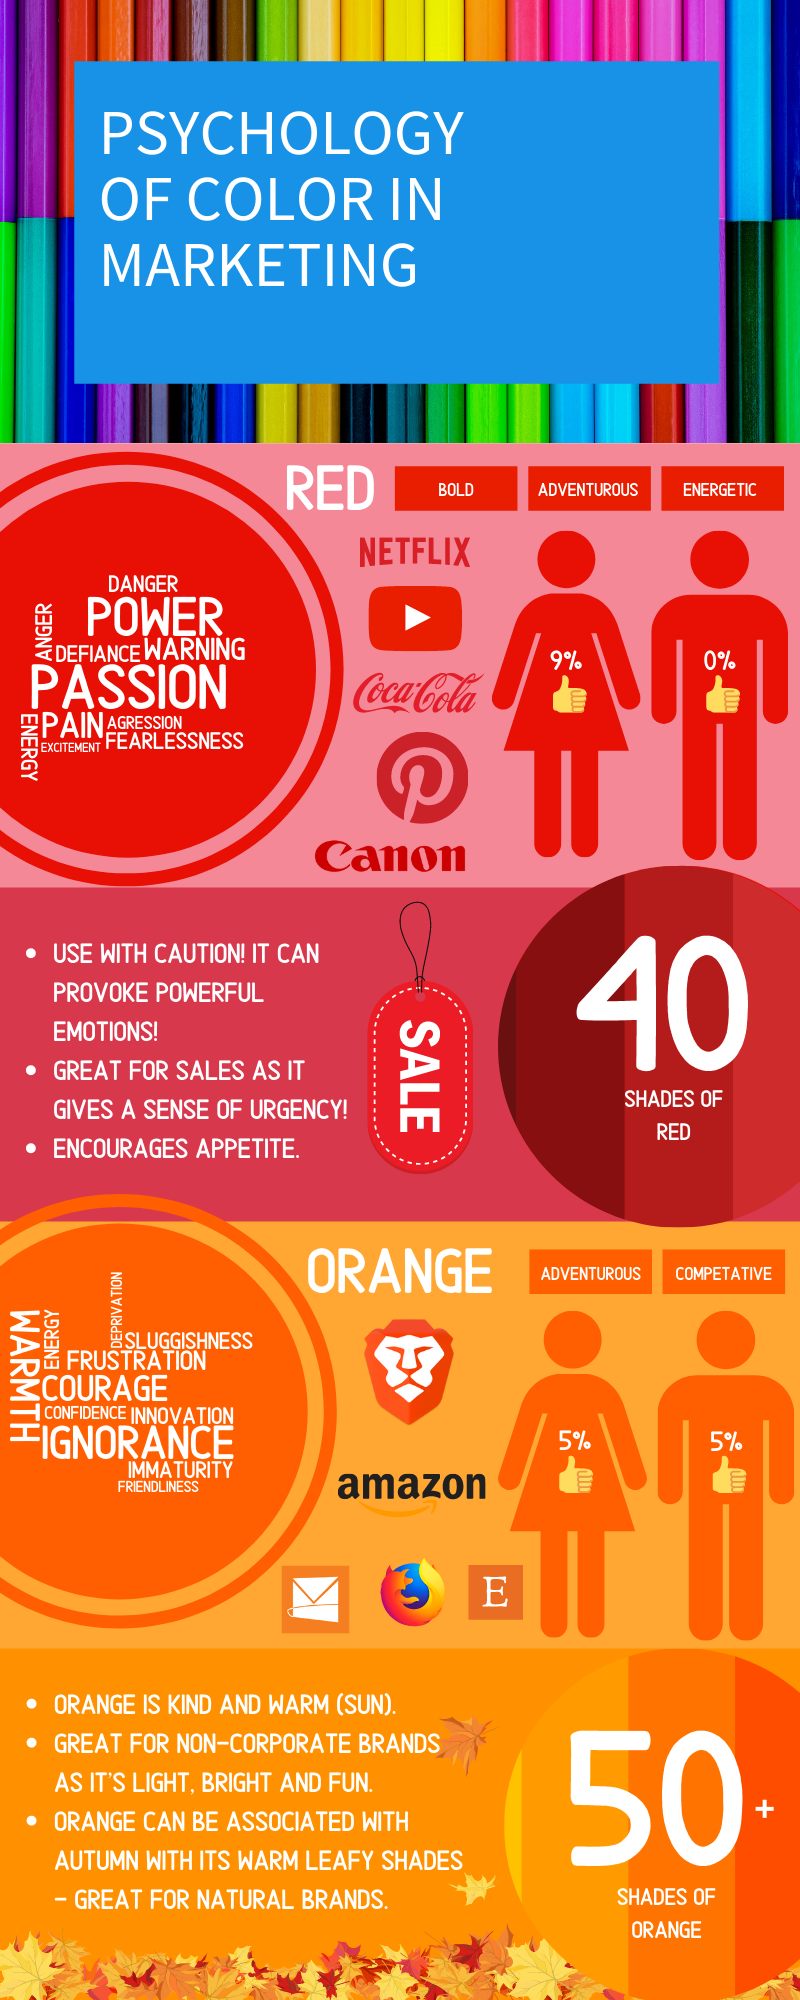 Psychology of color in marketing infographic